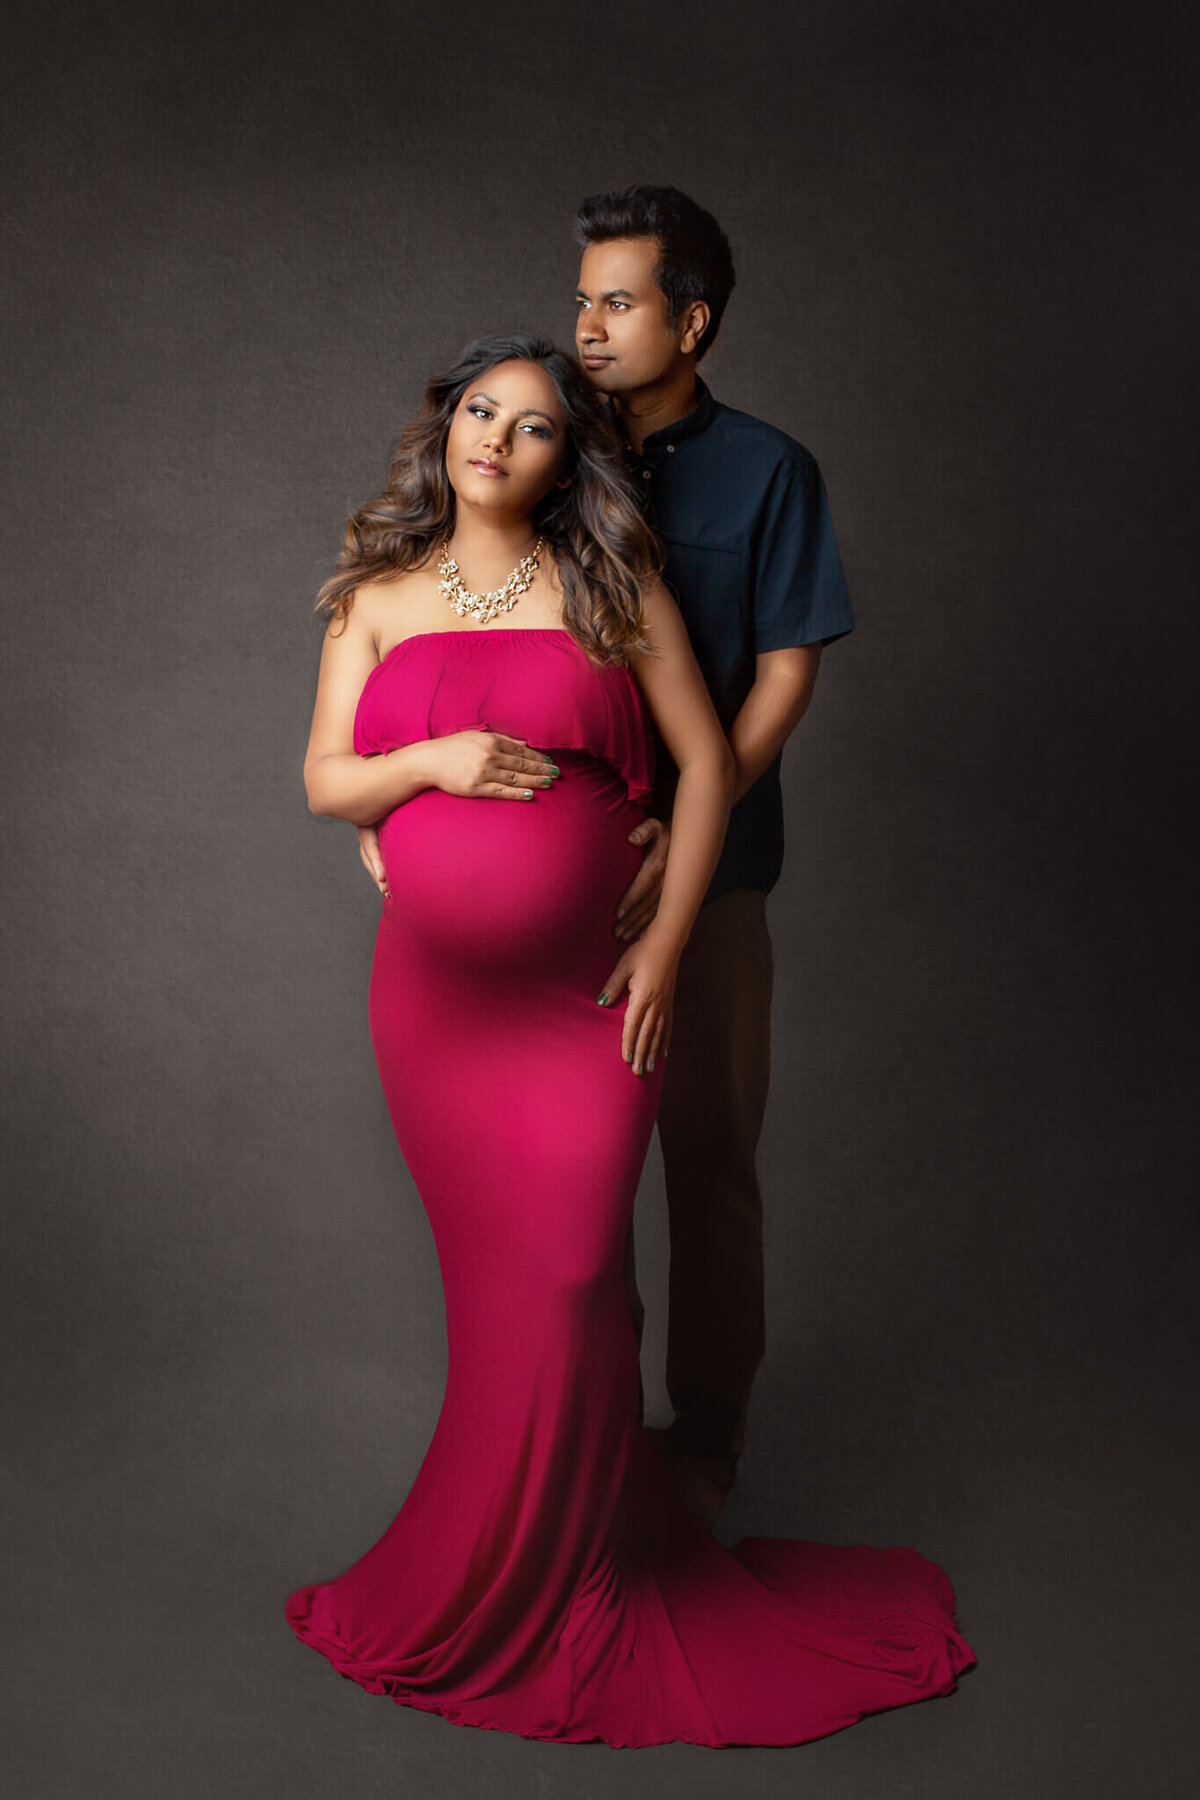 couple poses for maternity portraits in Hamilton, ON photography studio